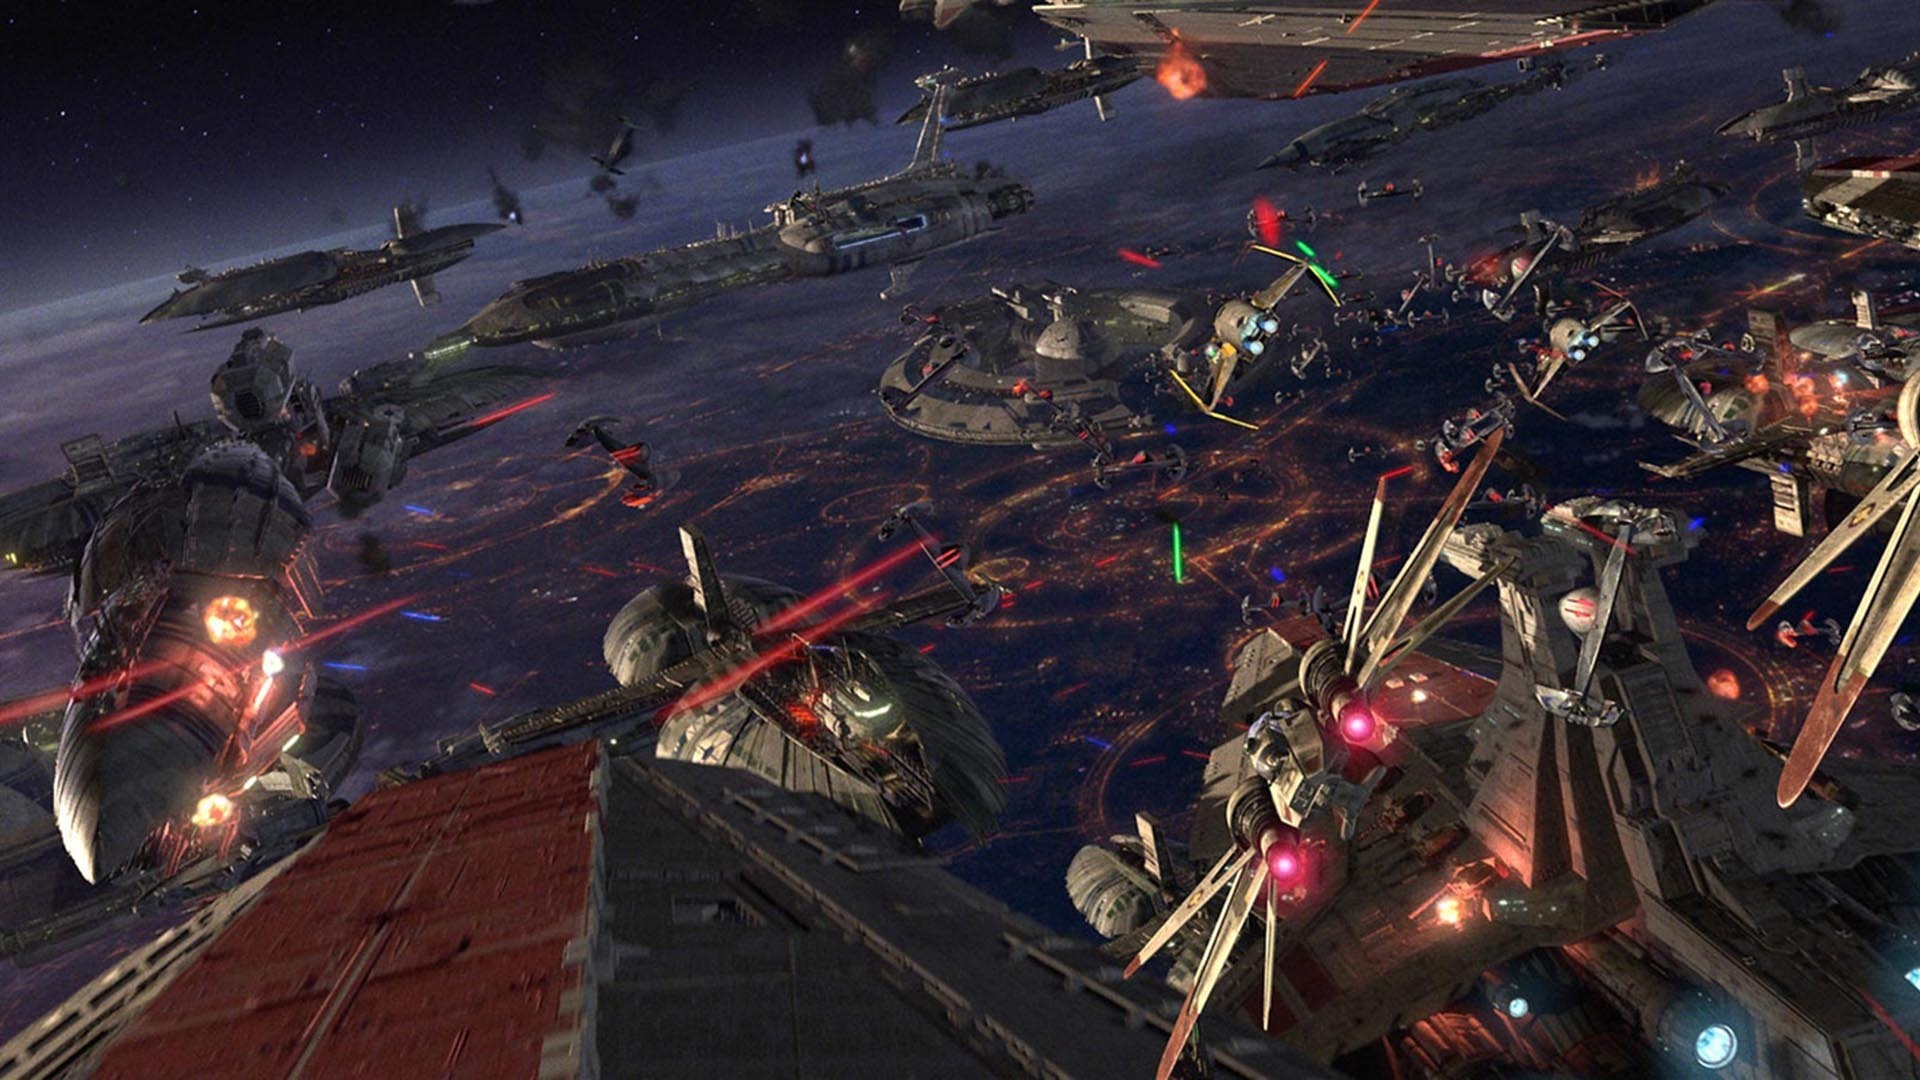 star, Wars, Episode, Iii, Revenge, Of, The, Sith, Sci fi, Battle, Spaceship, Space Wallpaper